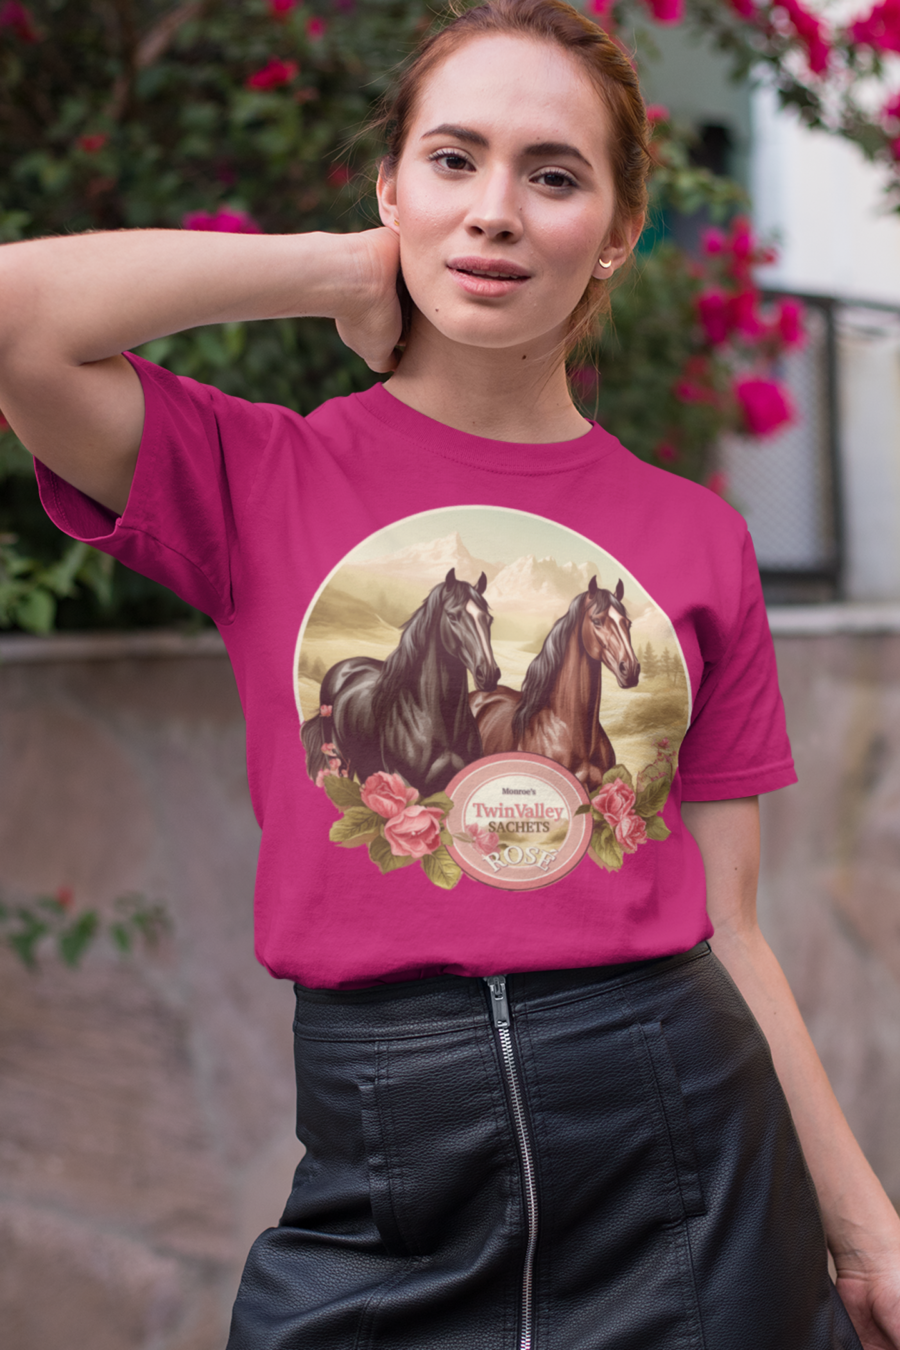 Woman wearing a tshirt with an advertisement of attractive victorian advertisement of sachets